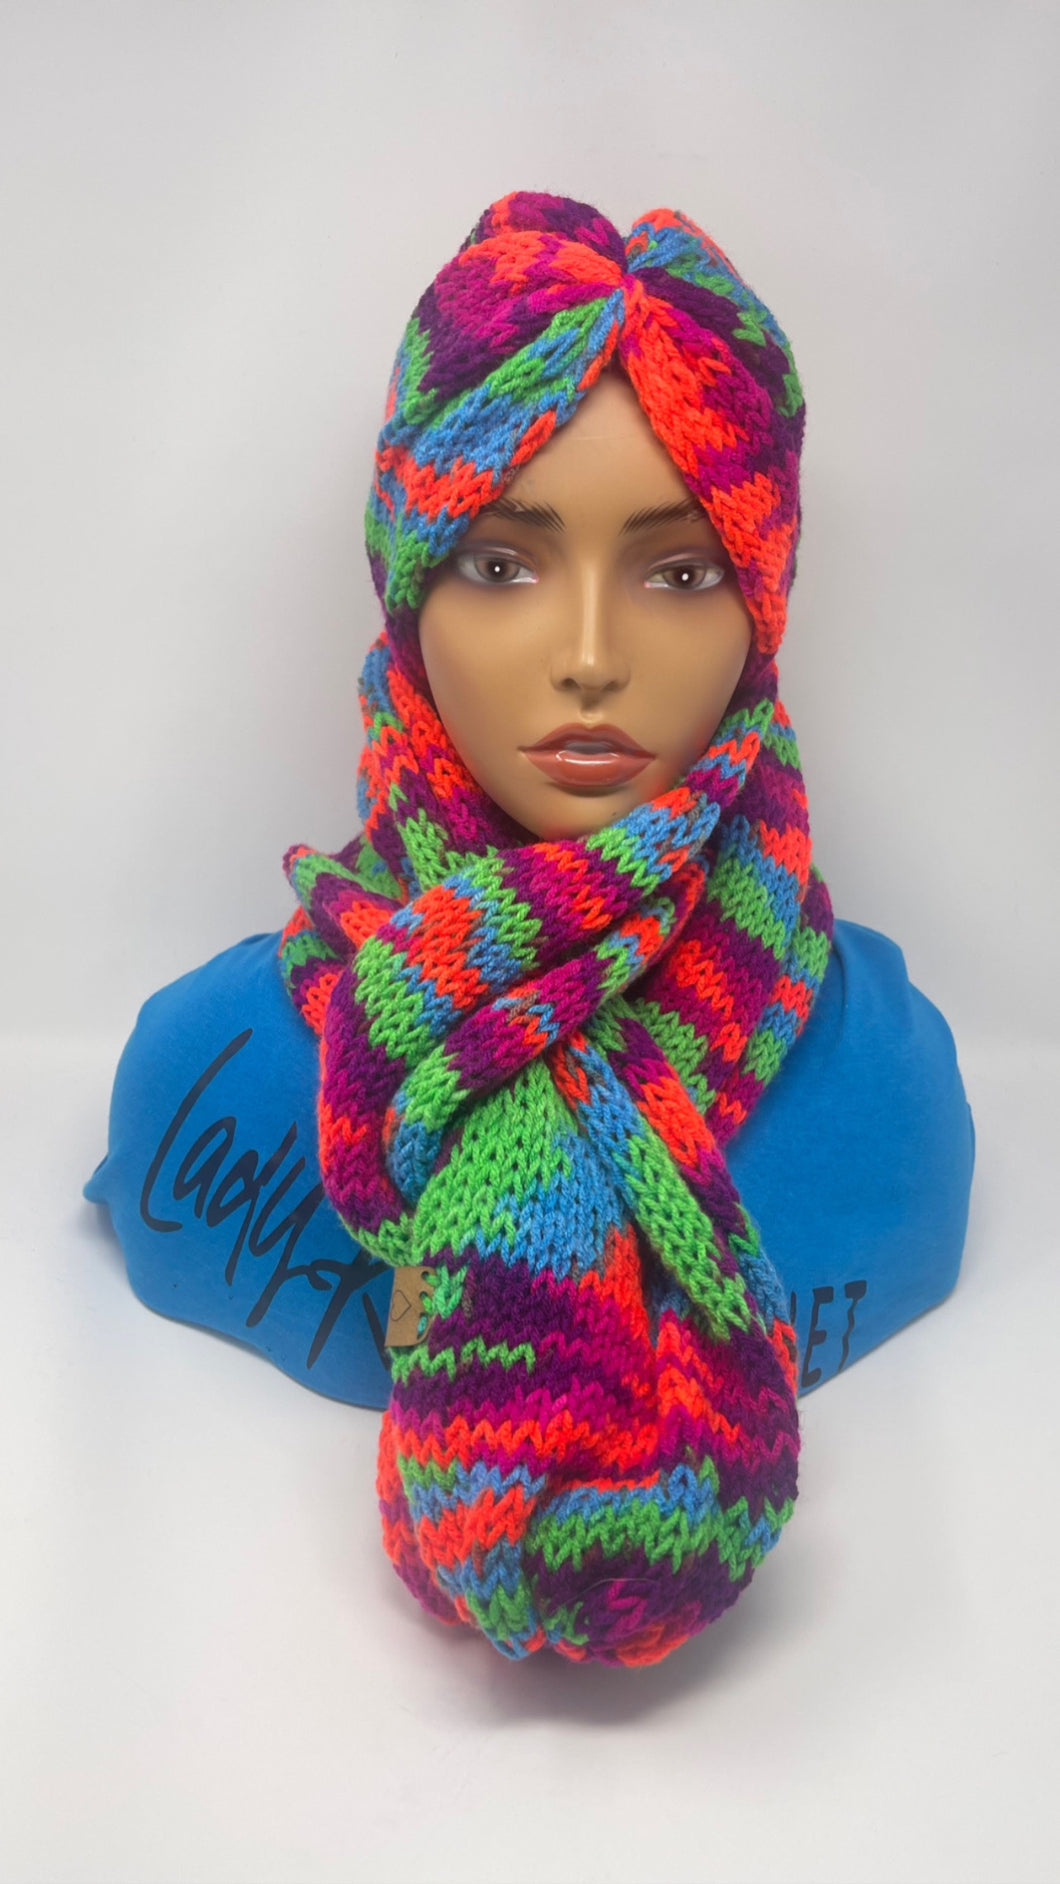 Multi Colored knit Headband and Scarf Set